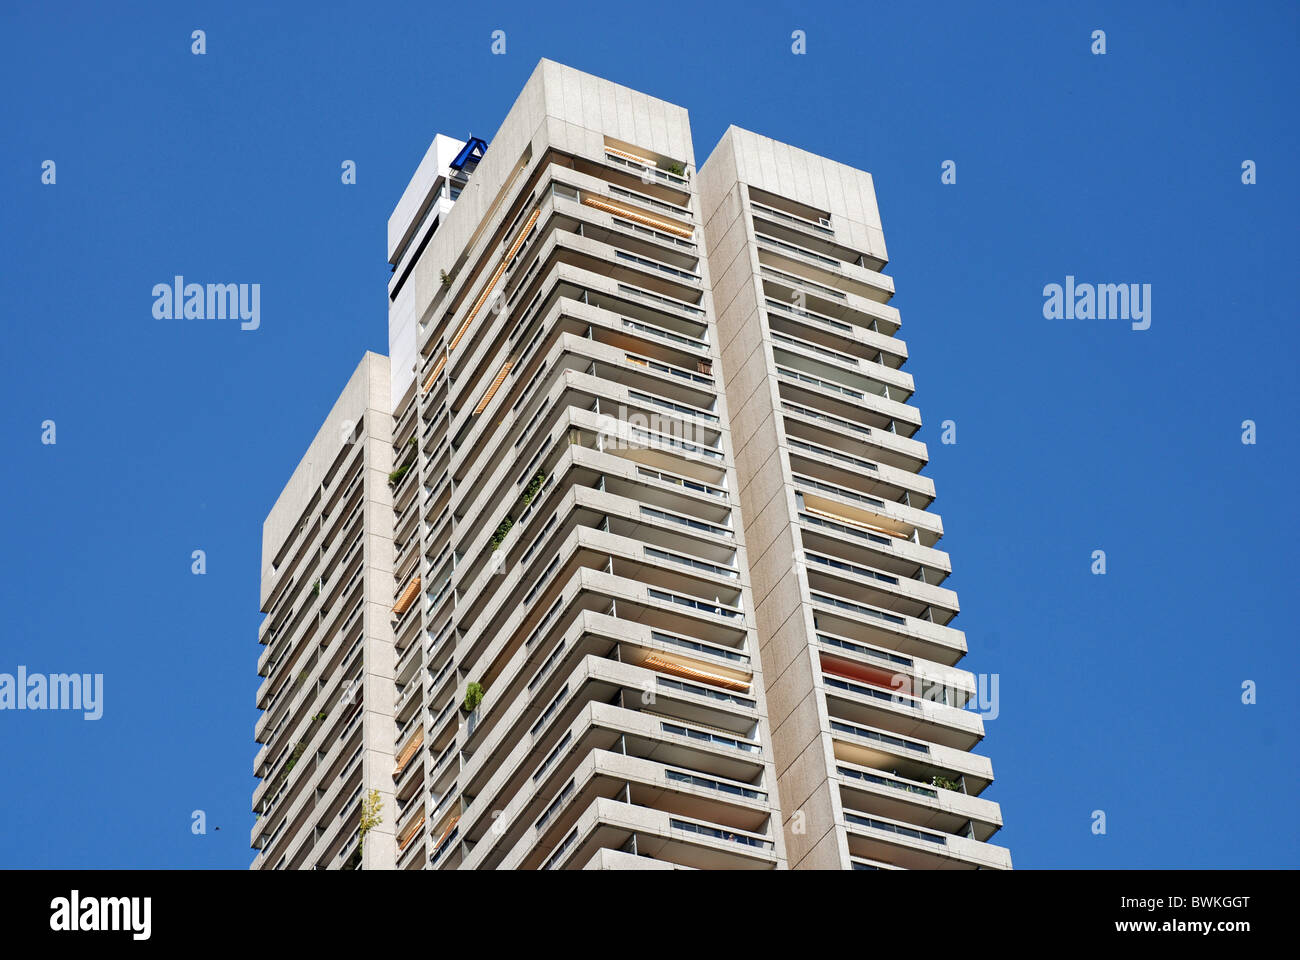 Cologne Colonia highrise towerblock multistory Germany Europe residential block apartments floors living sk Stock Photo